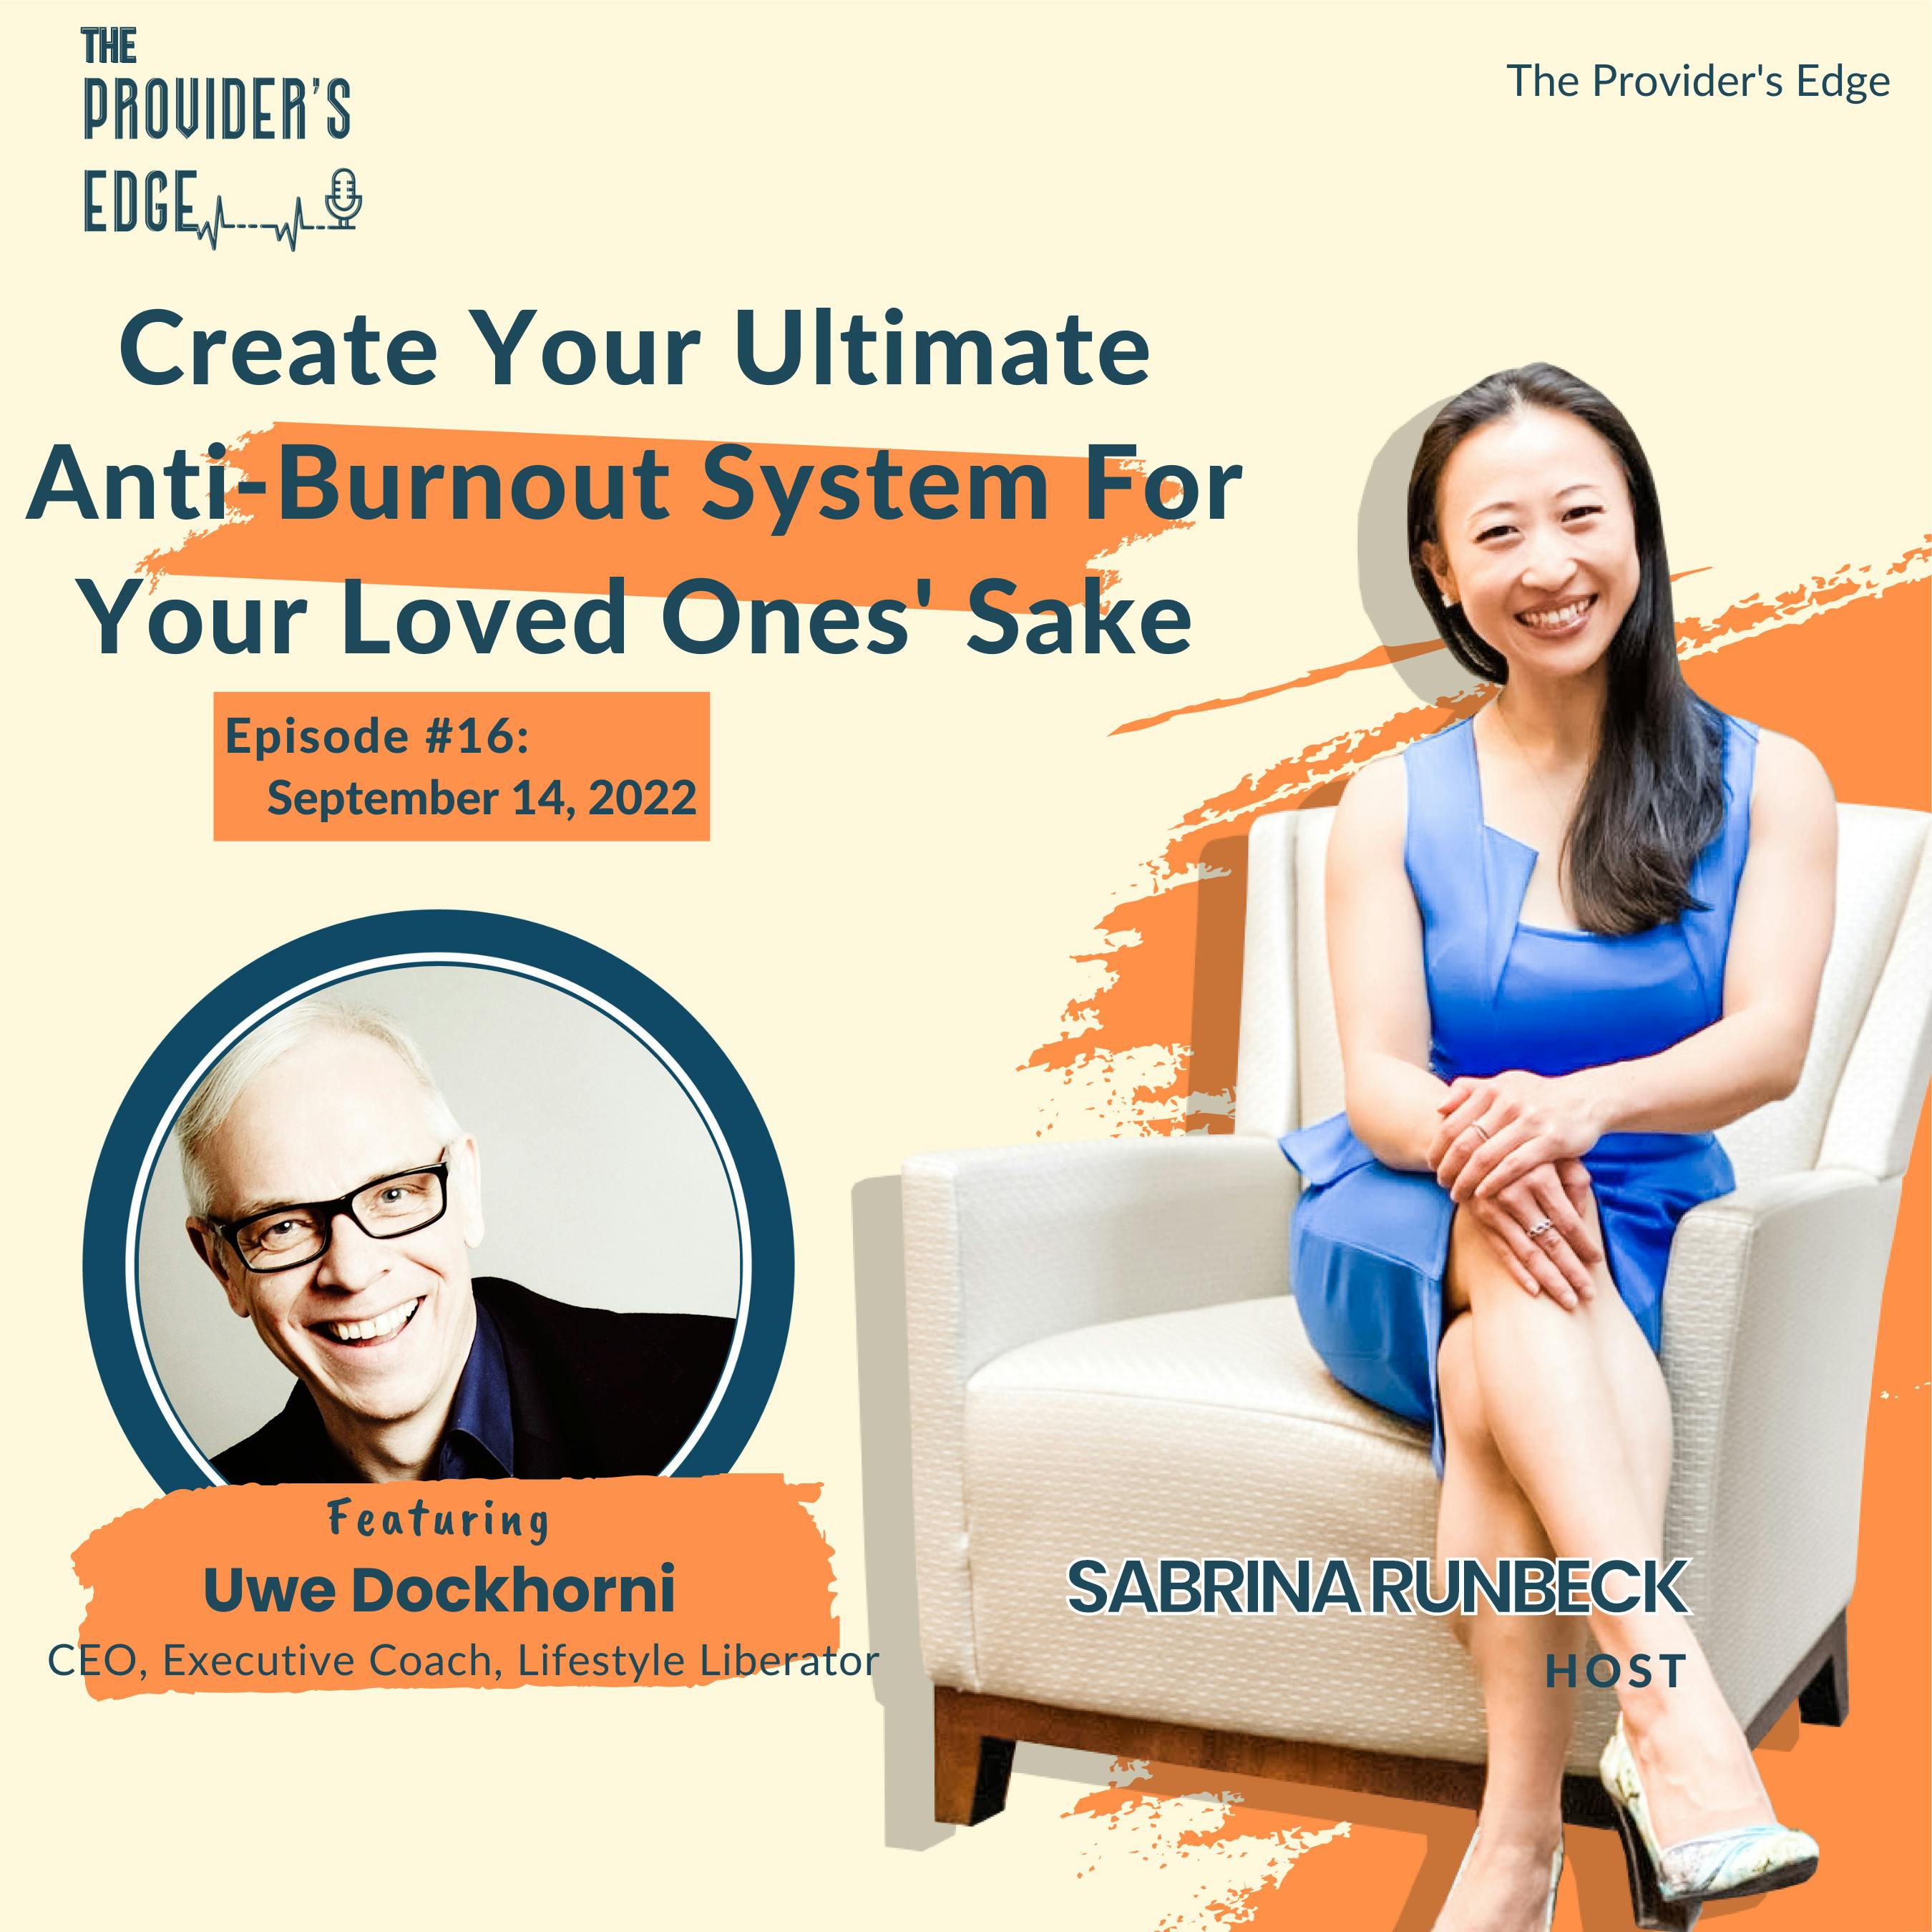 Create Your Ultimate Anti-Burnout System For Your Loved Ones’ Sake with Uwe Duckhorn Ep 16